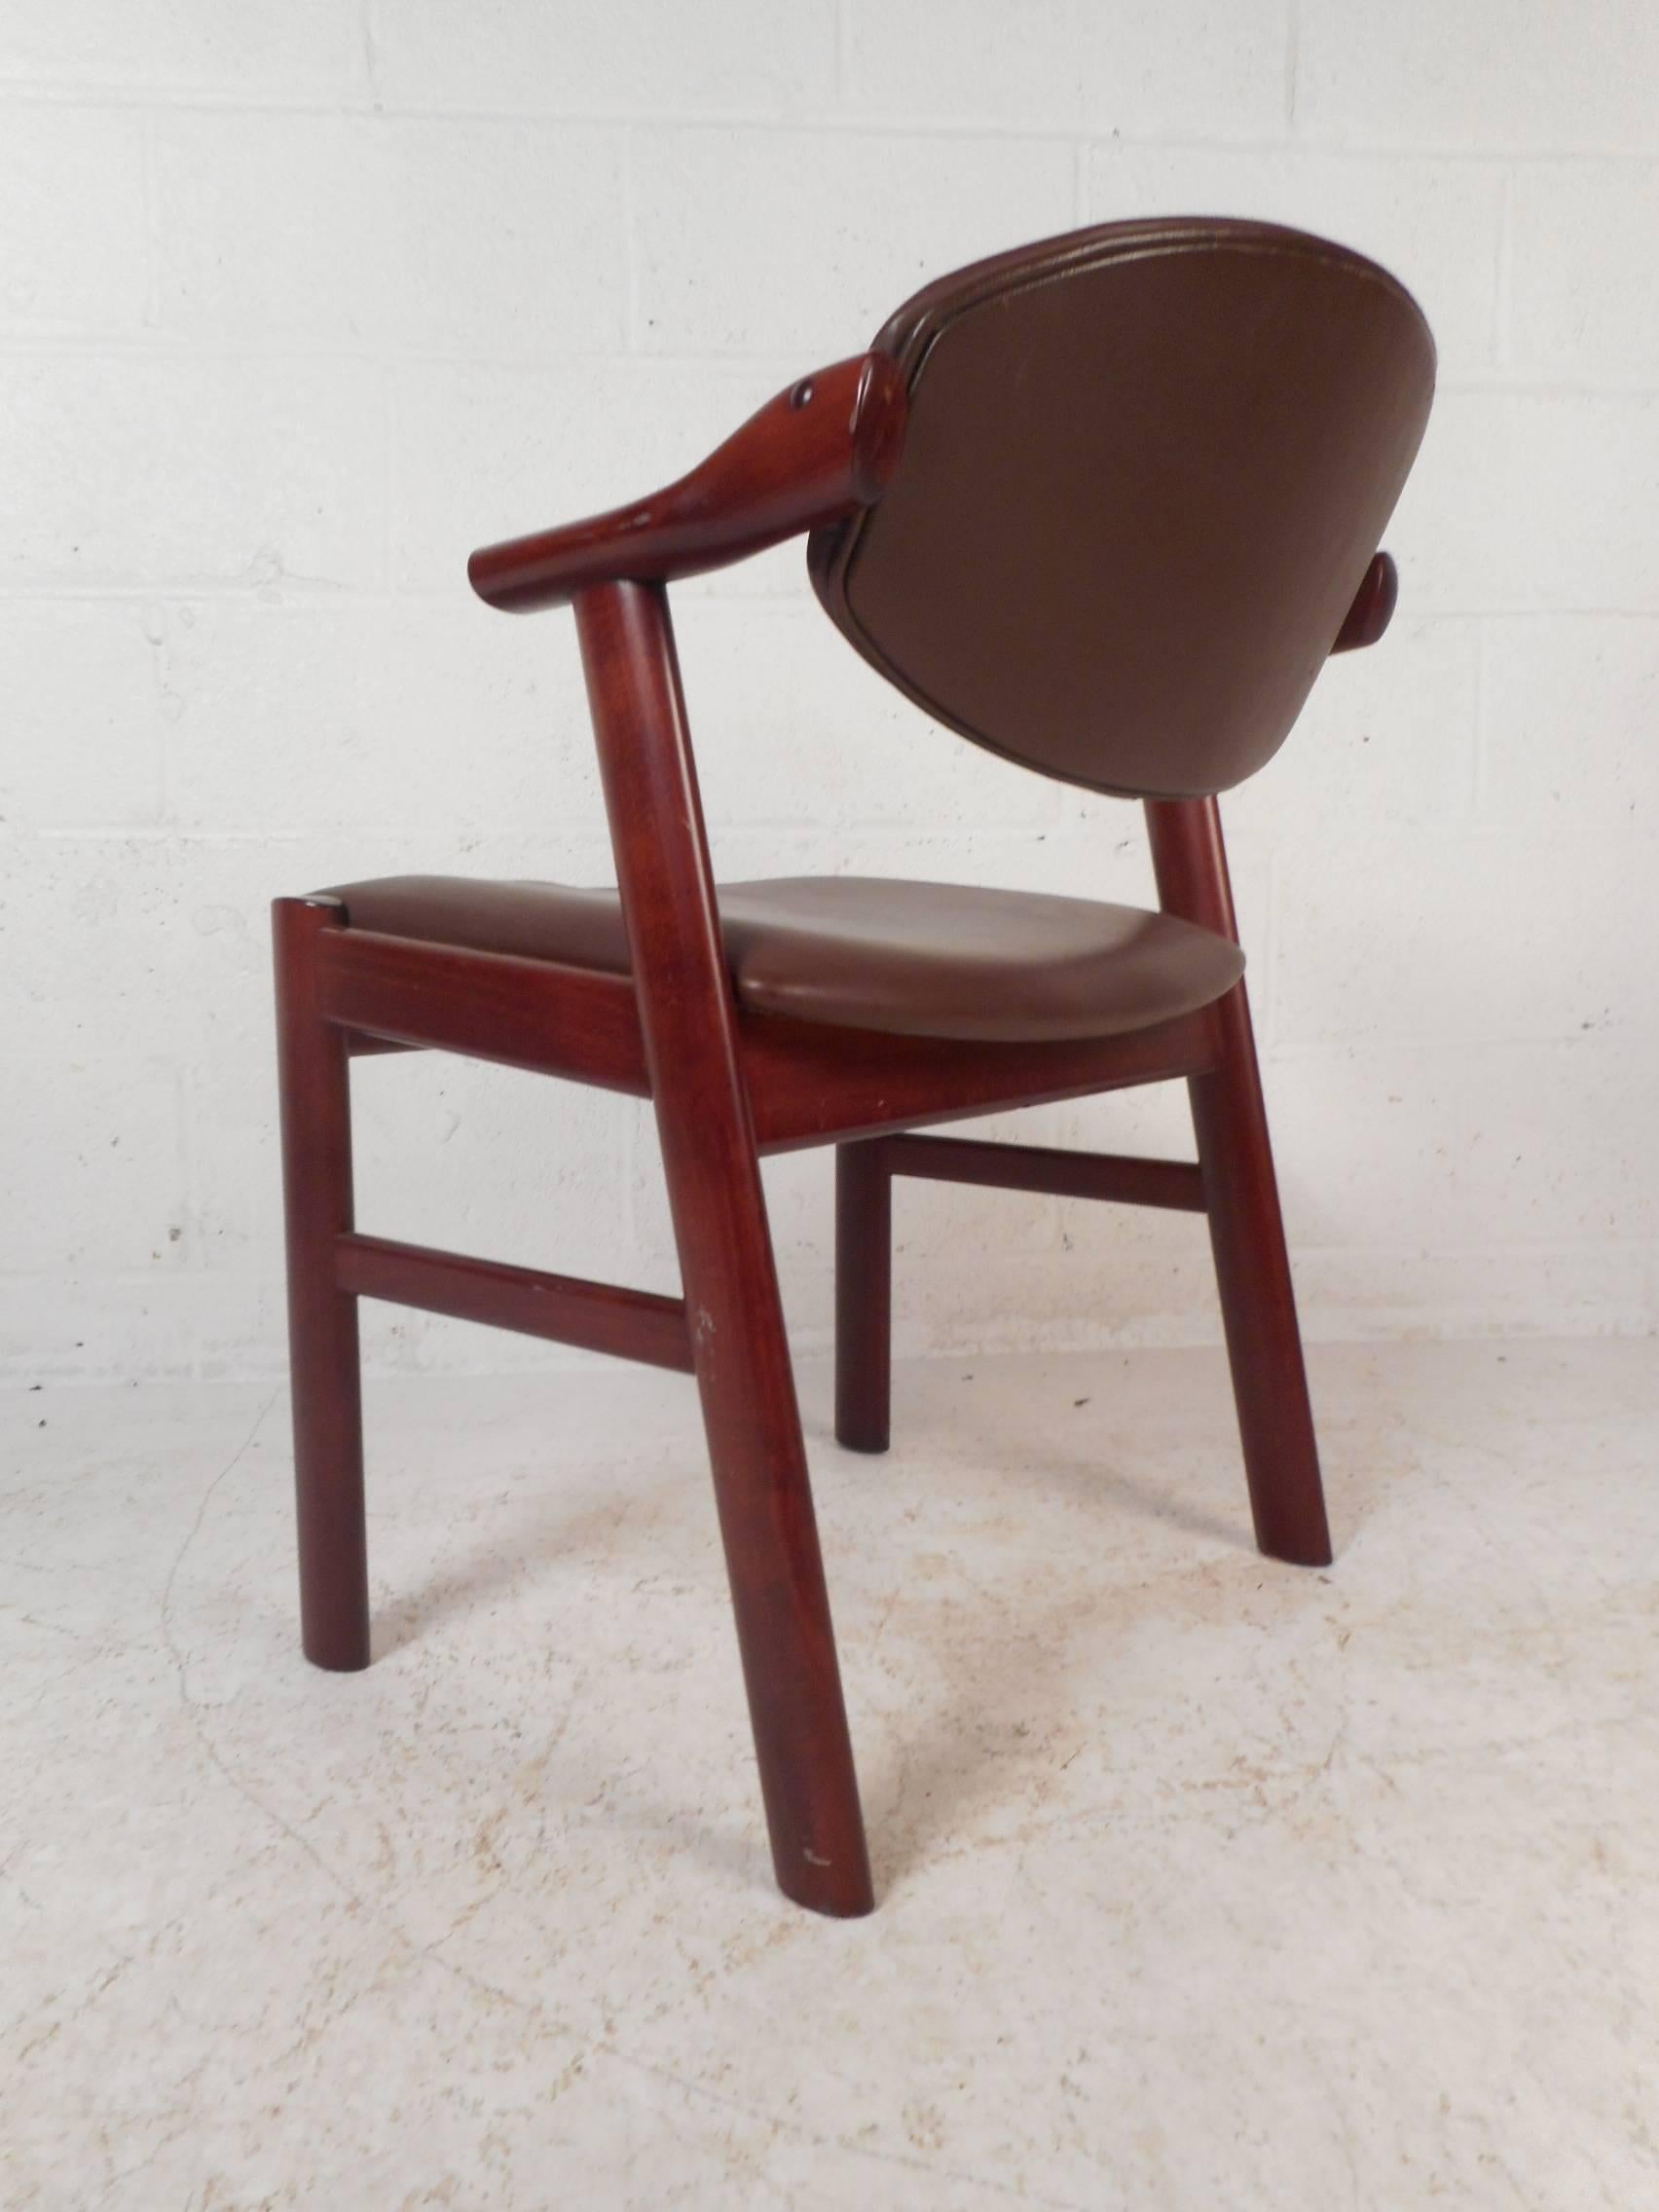 Set of 4 Vintage Danish Rosewood Chairs by Schou Andersen In Good Condition For Sale In Brooklyn, NY